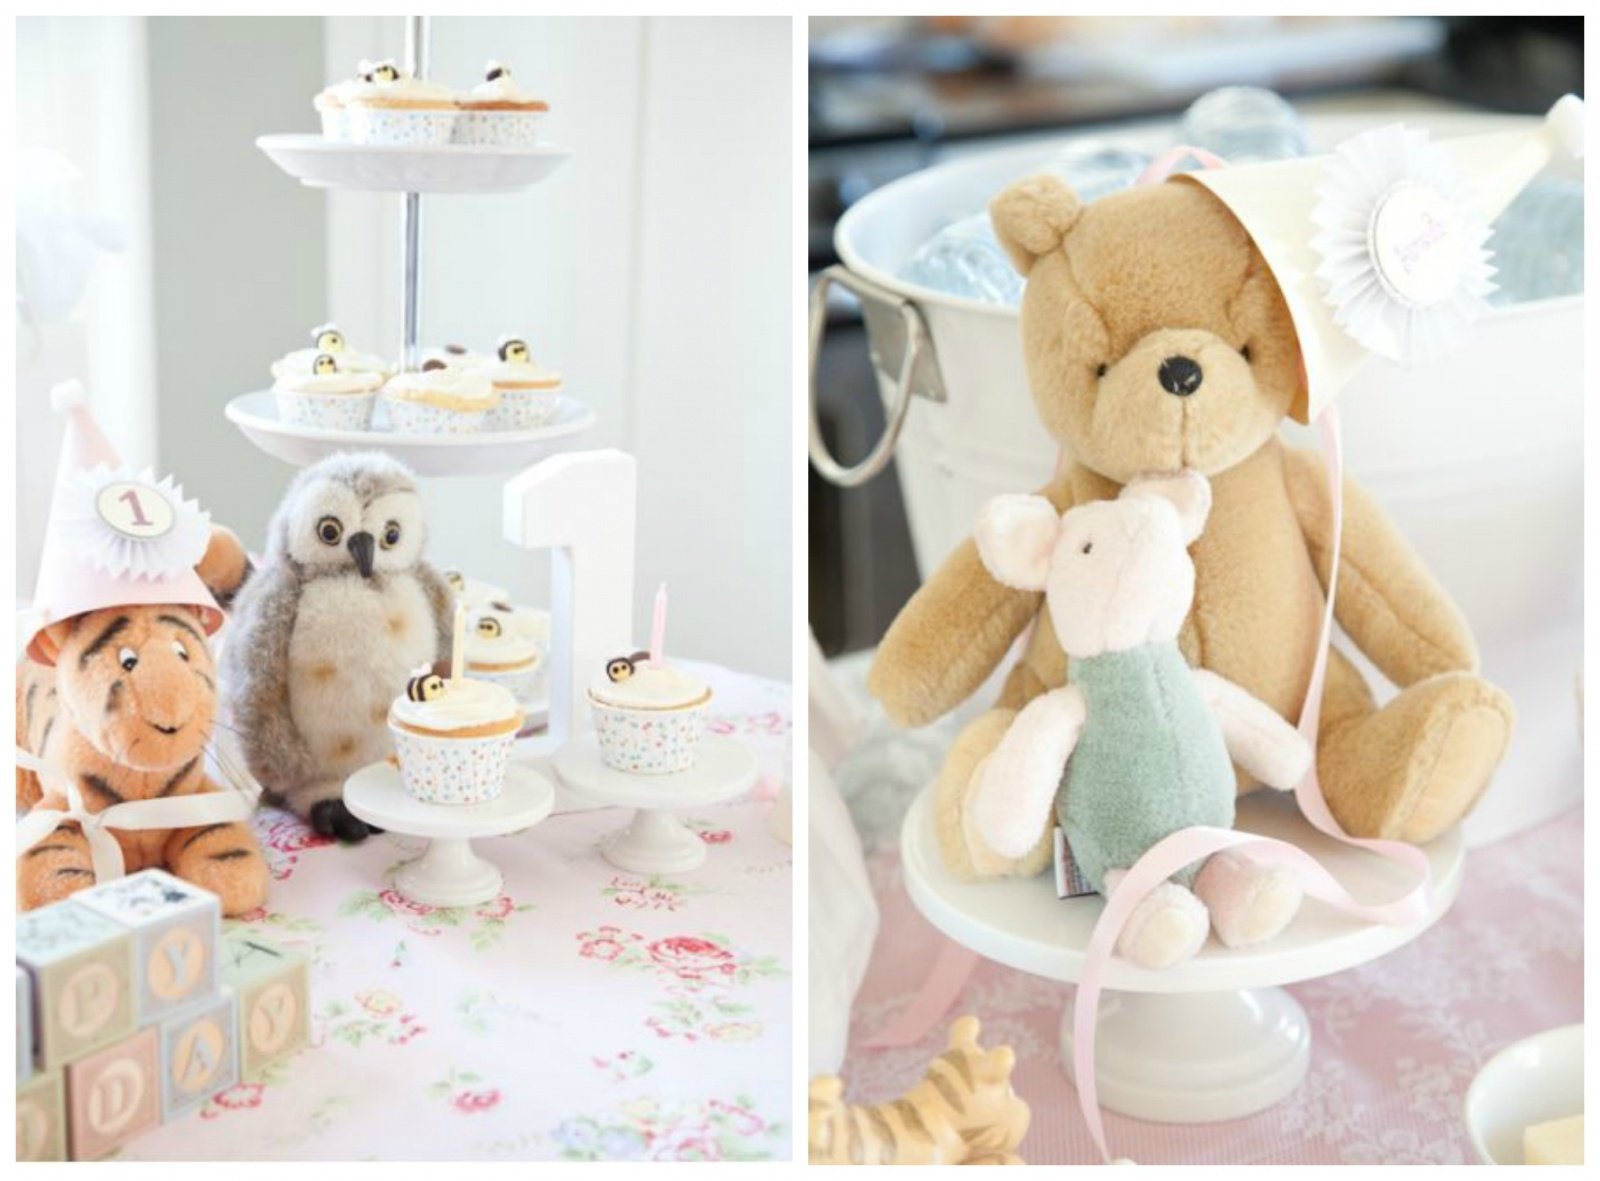 Inspiration For A Sweet Winnie The Pooh Themed Baby Shower -Beau-coup Blog